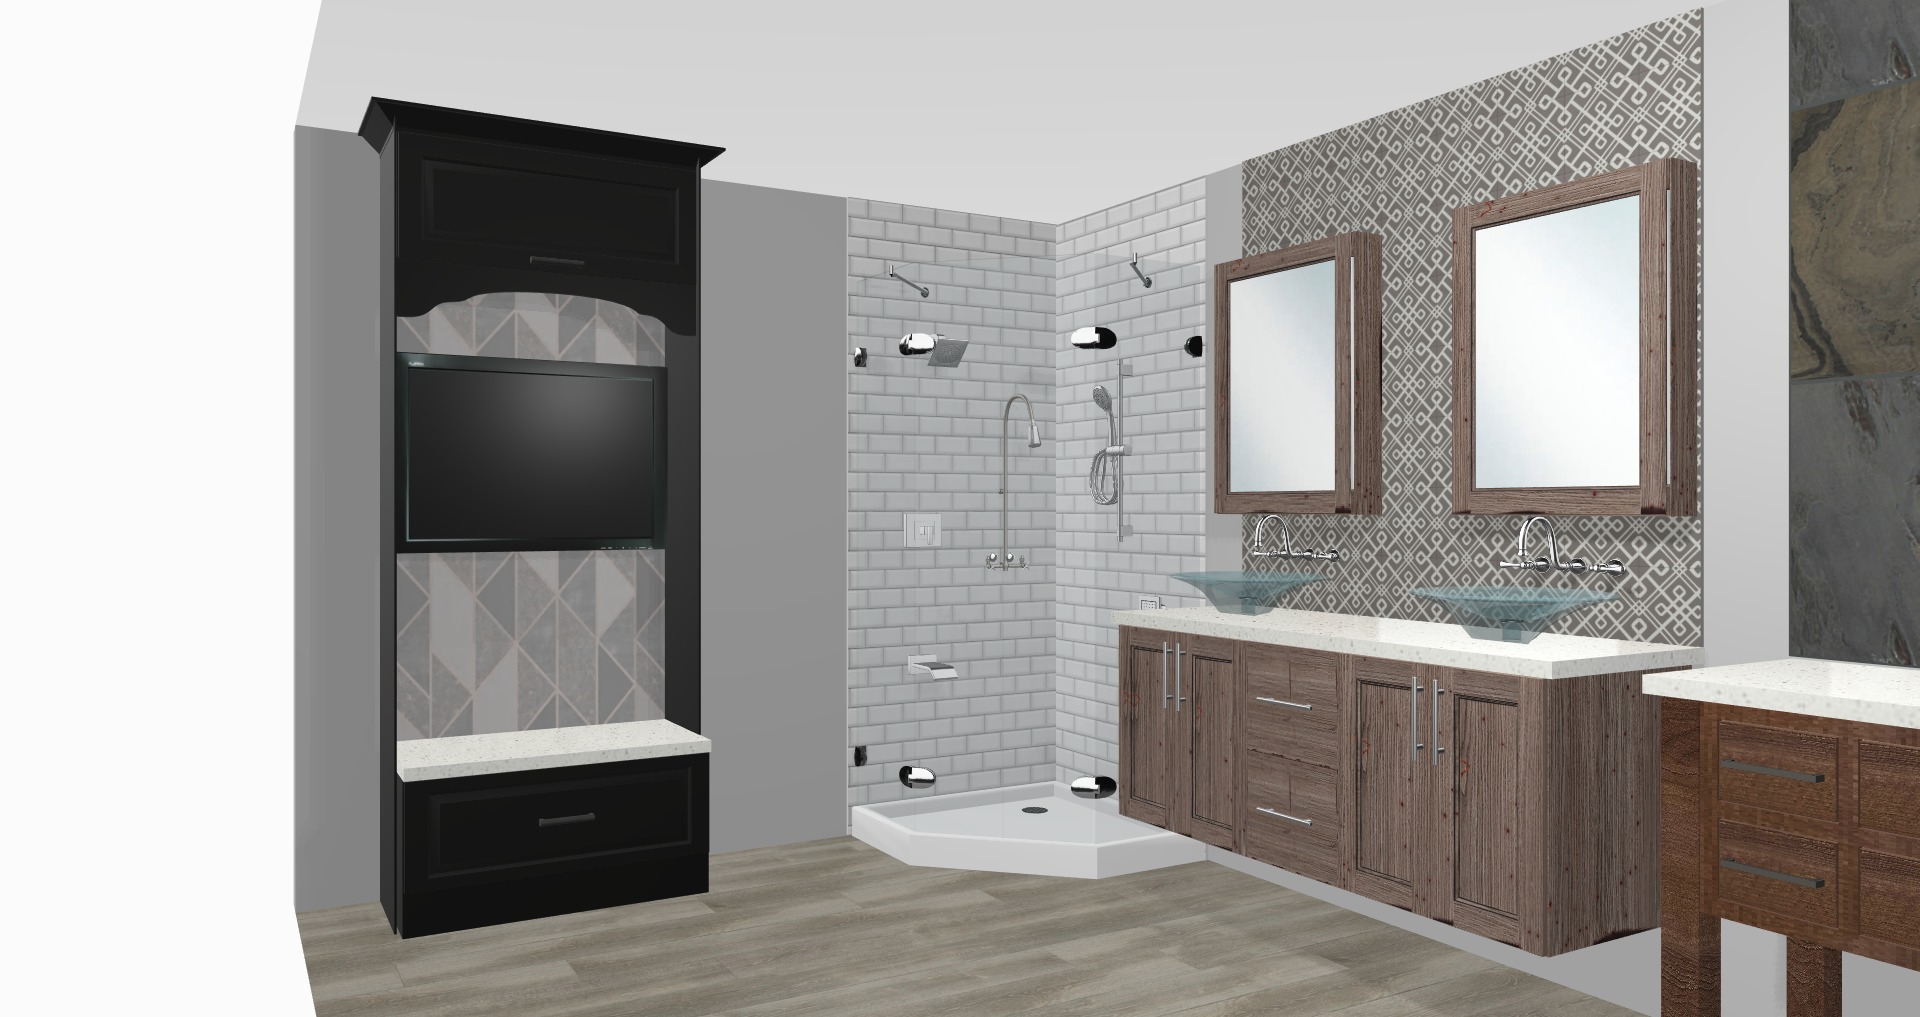 3-D Rendering of an upscale shower and floating vanity. Welcome signage housed in custom cabinetry - DreamMaker Bath & Kitchen of Larimer County Fort Collins (970)616-0900